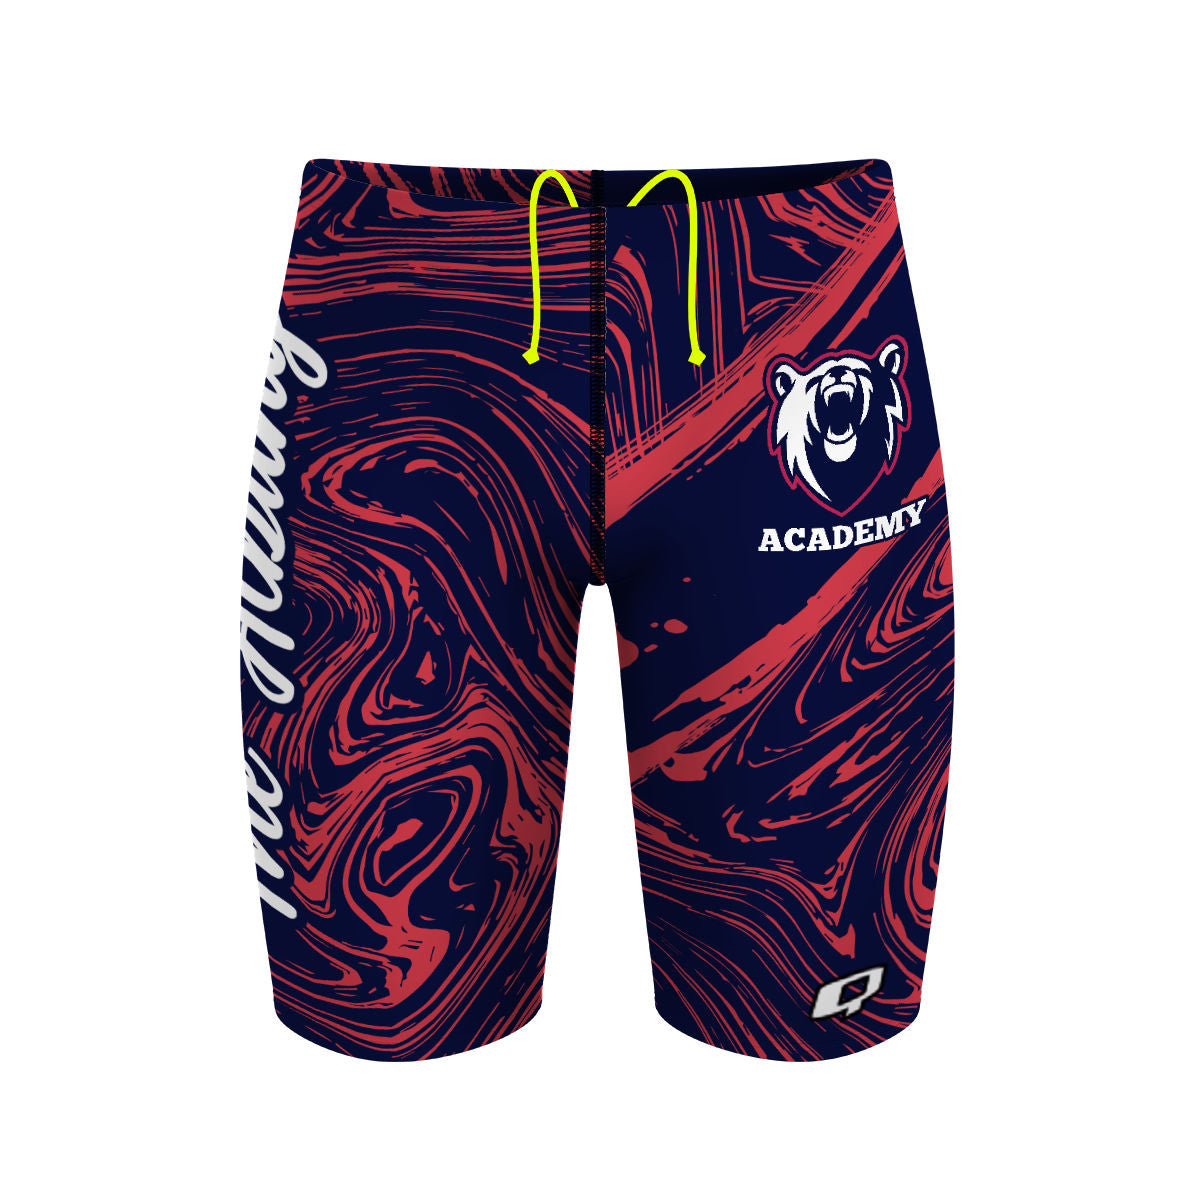 The Albany Academy - Jammer Swimsuit